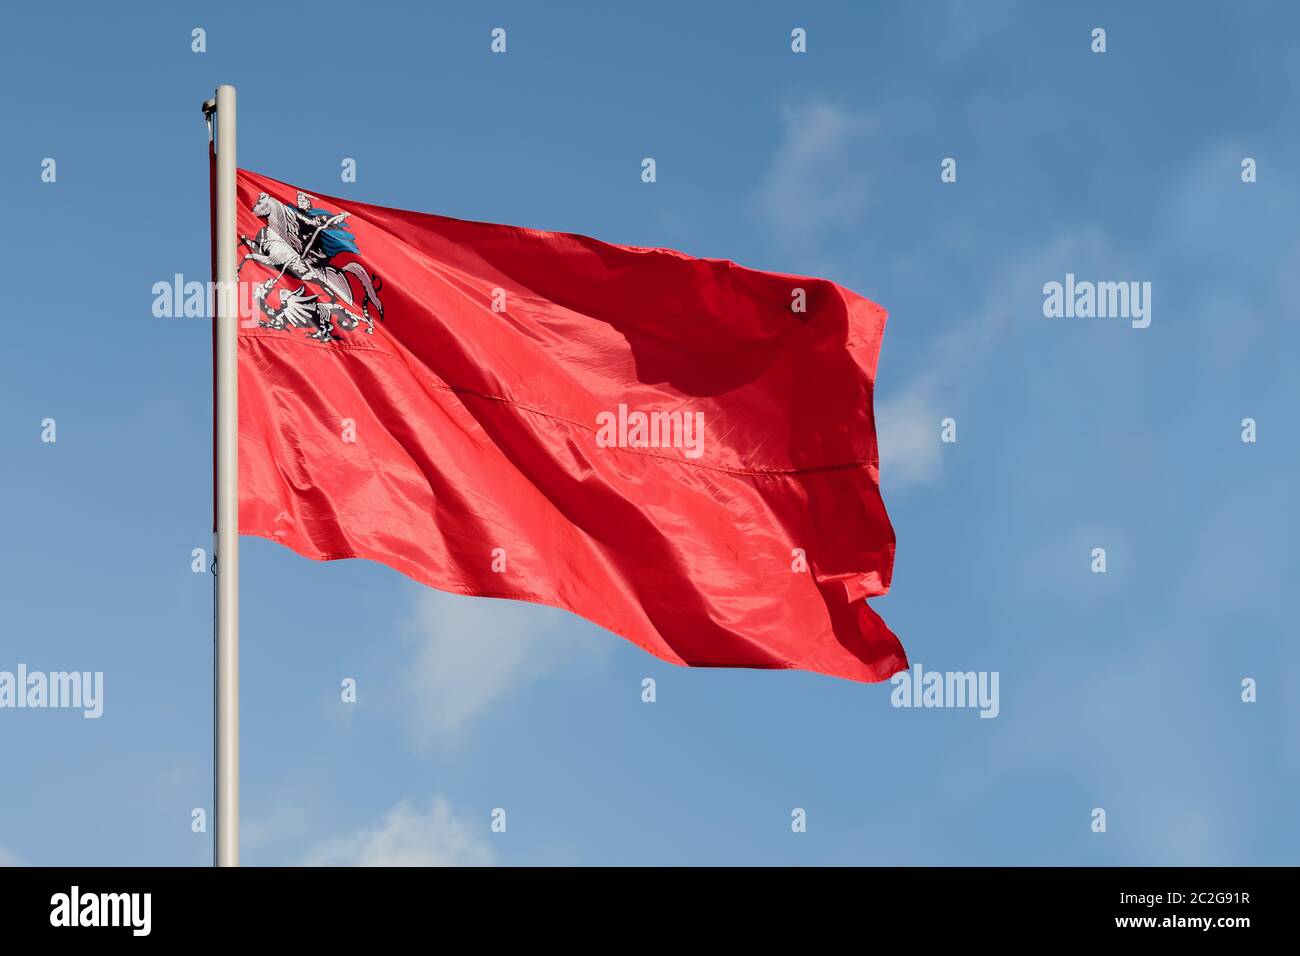 Moscow city flag is waving in front of blue sky Stock Photo